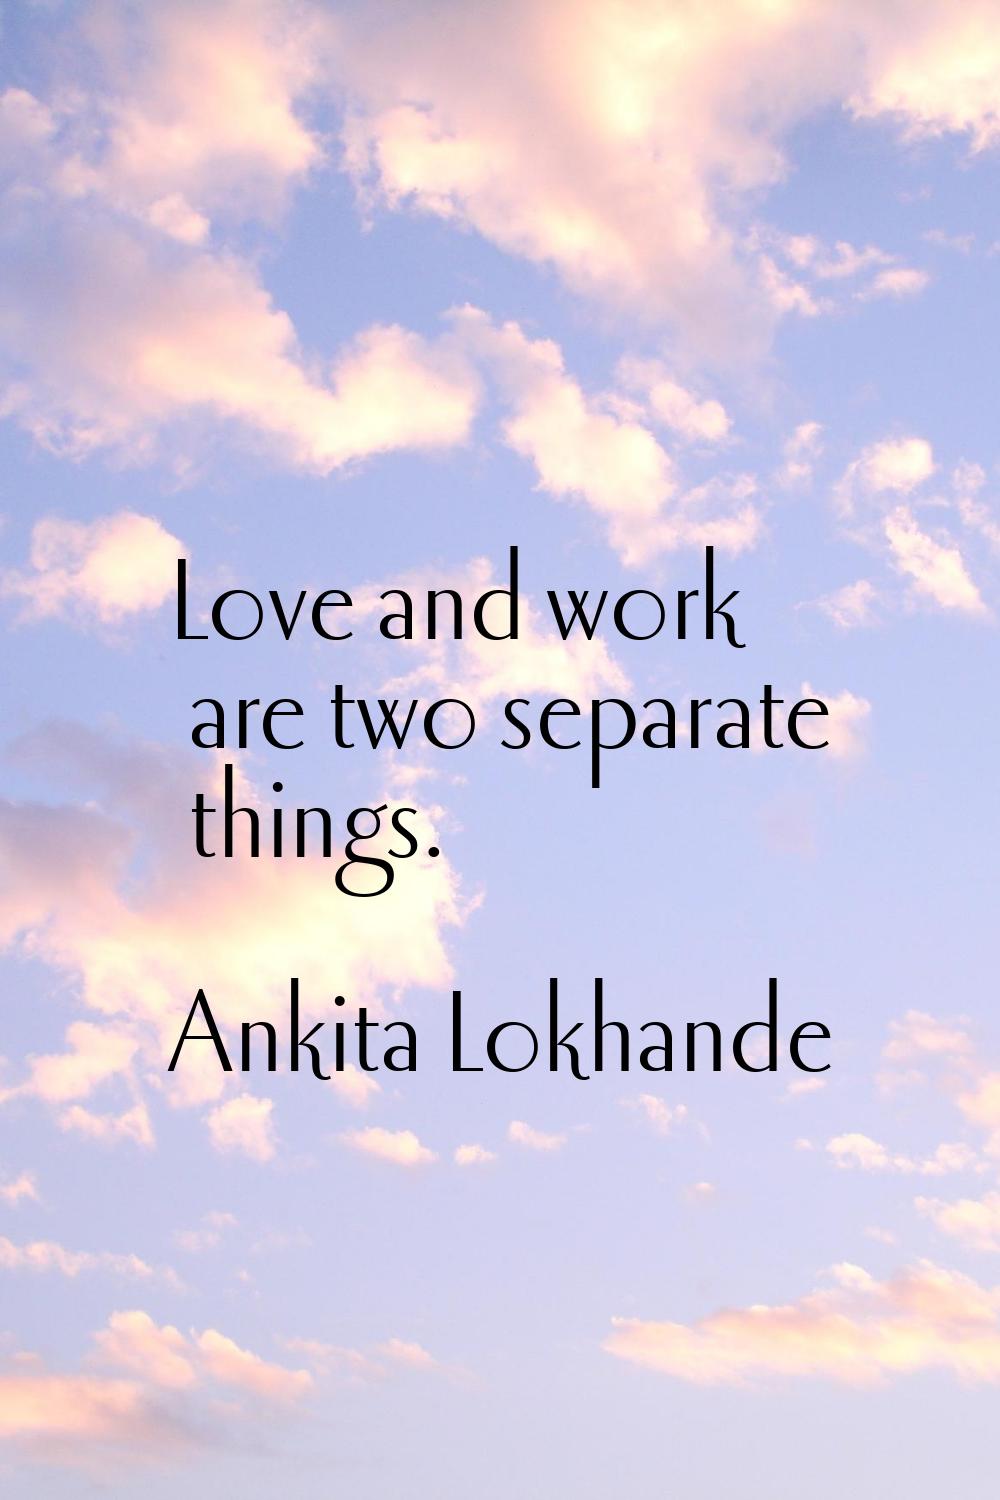 Love and work are two separate things.